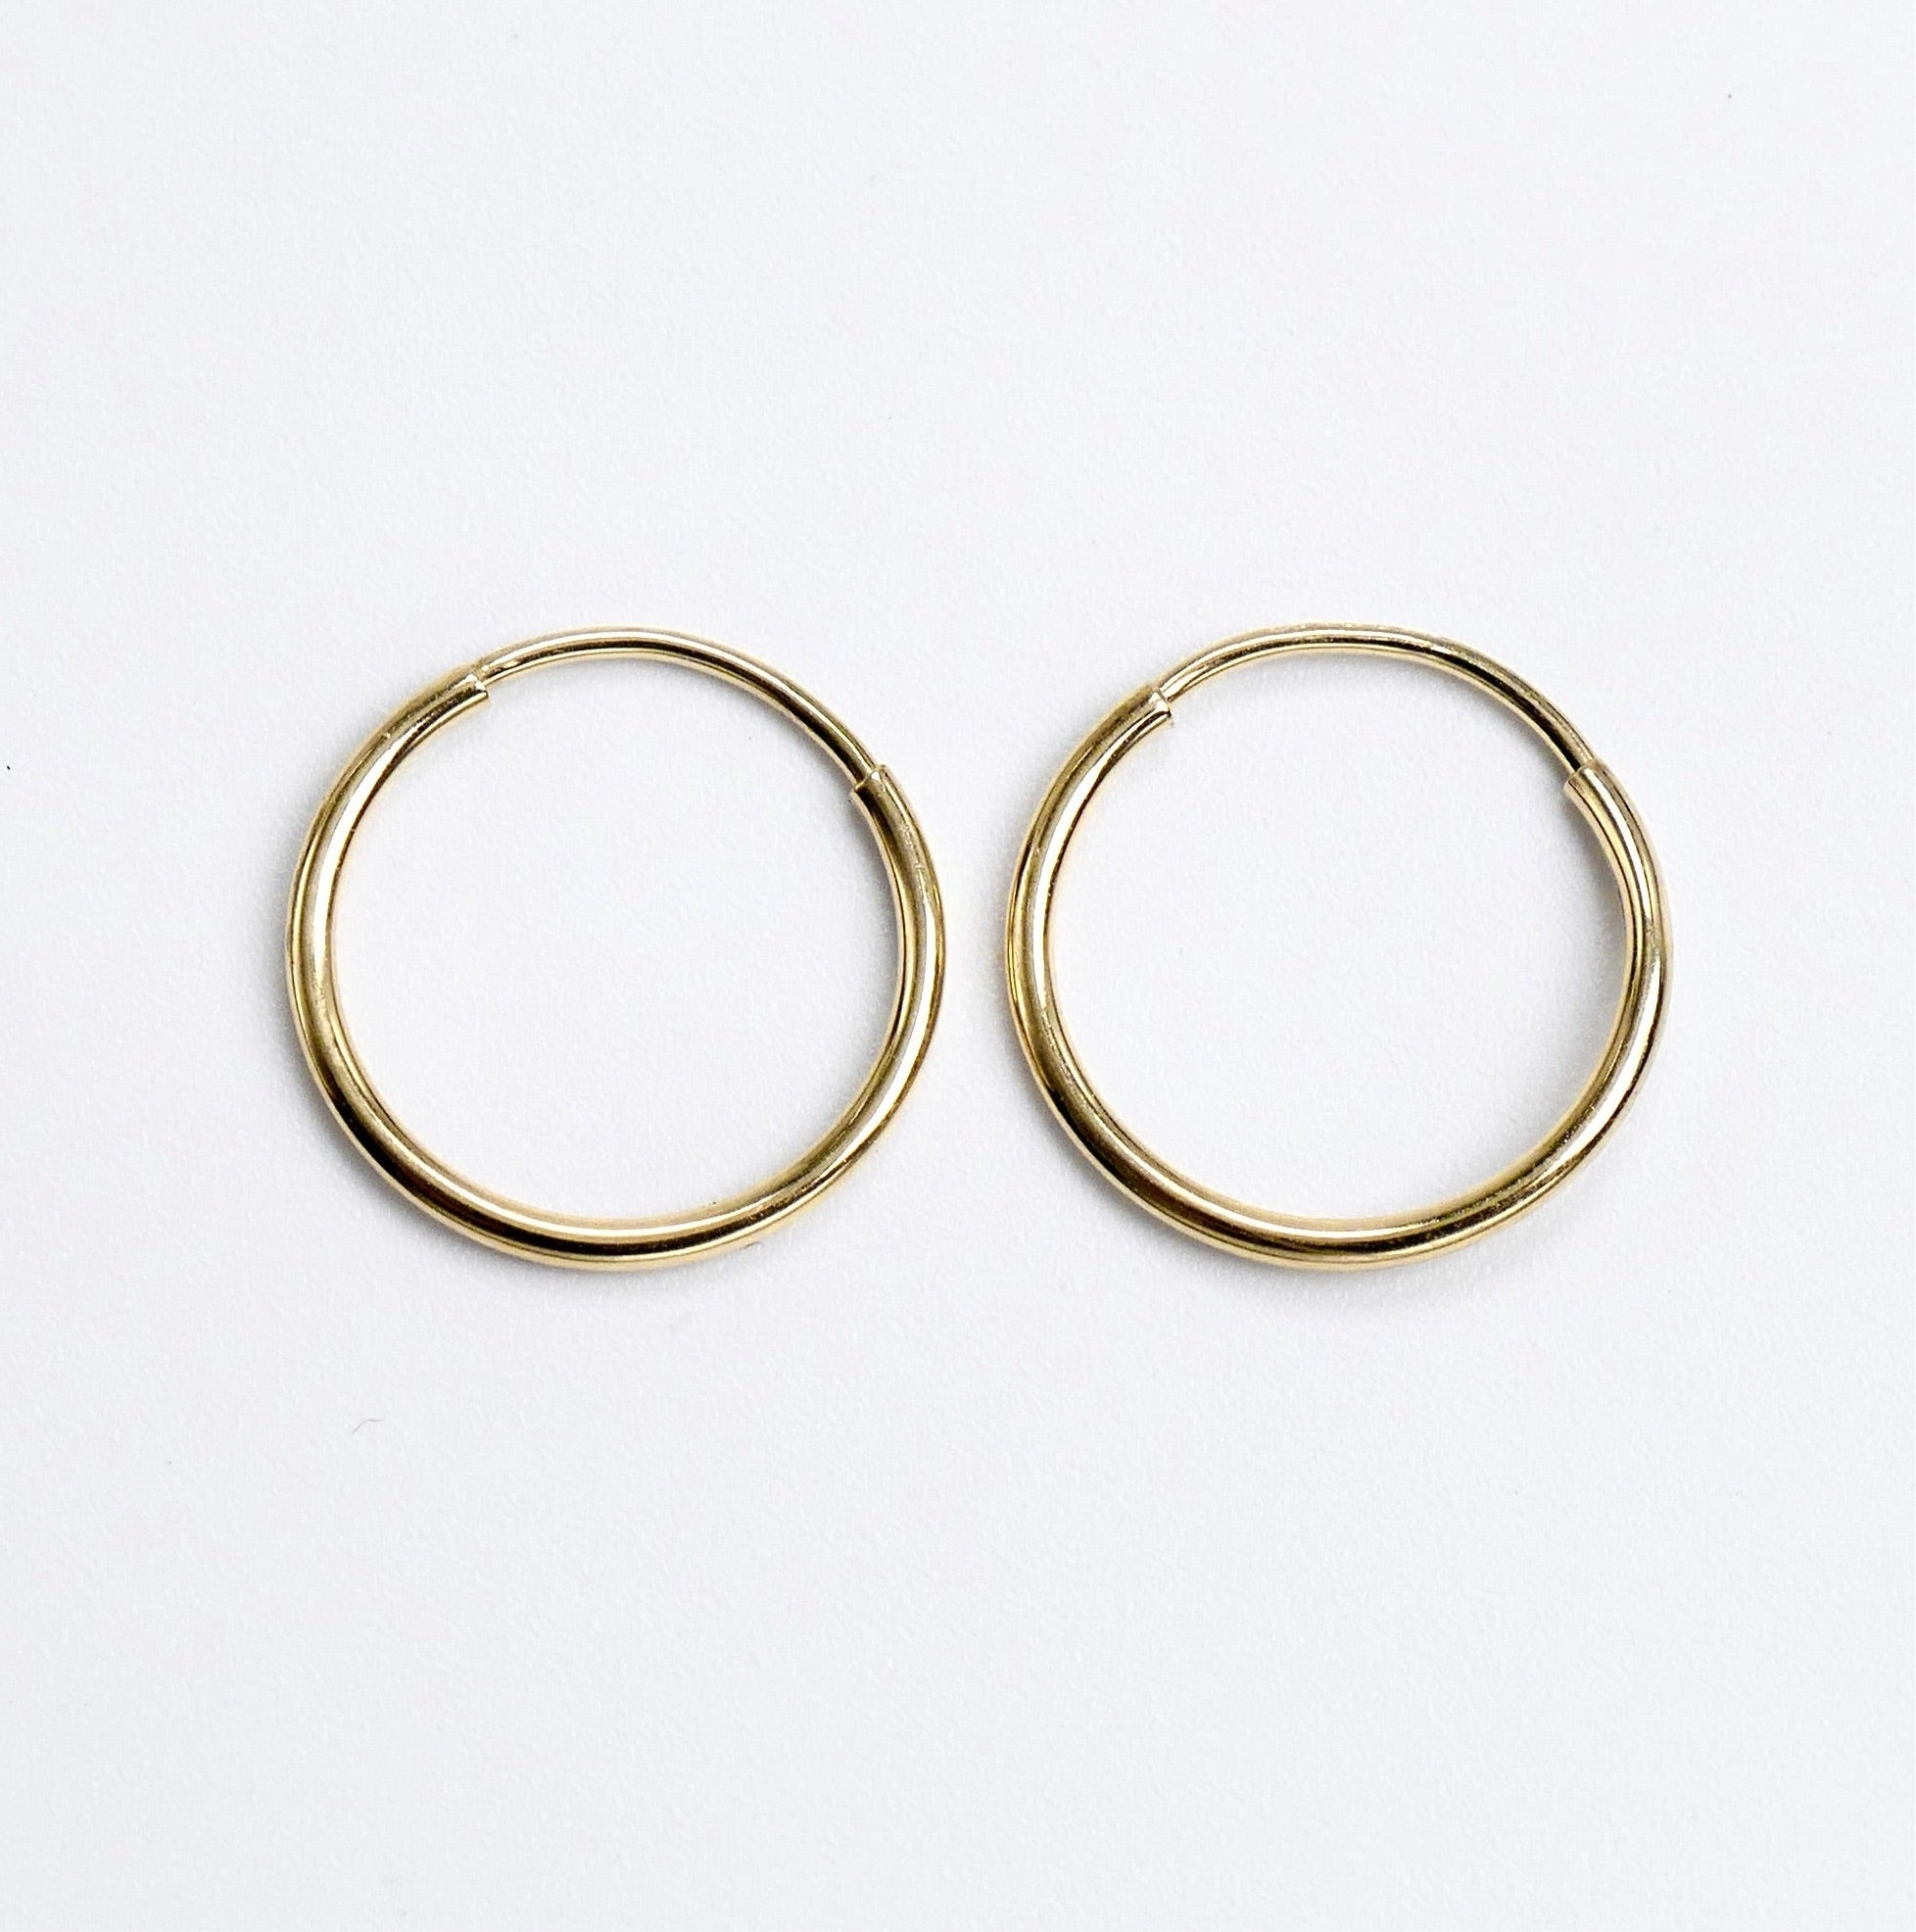 Continuous Hoop Earrings 14K Yellow Gold 14mm